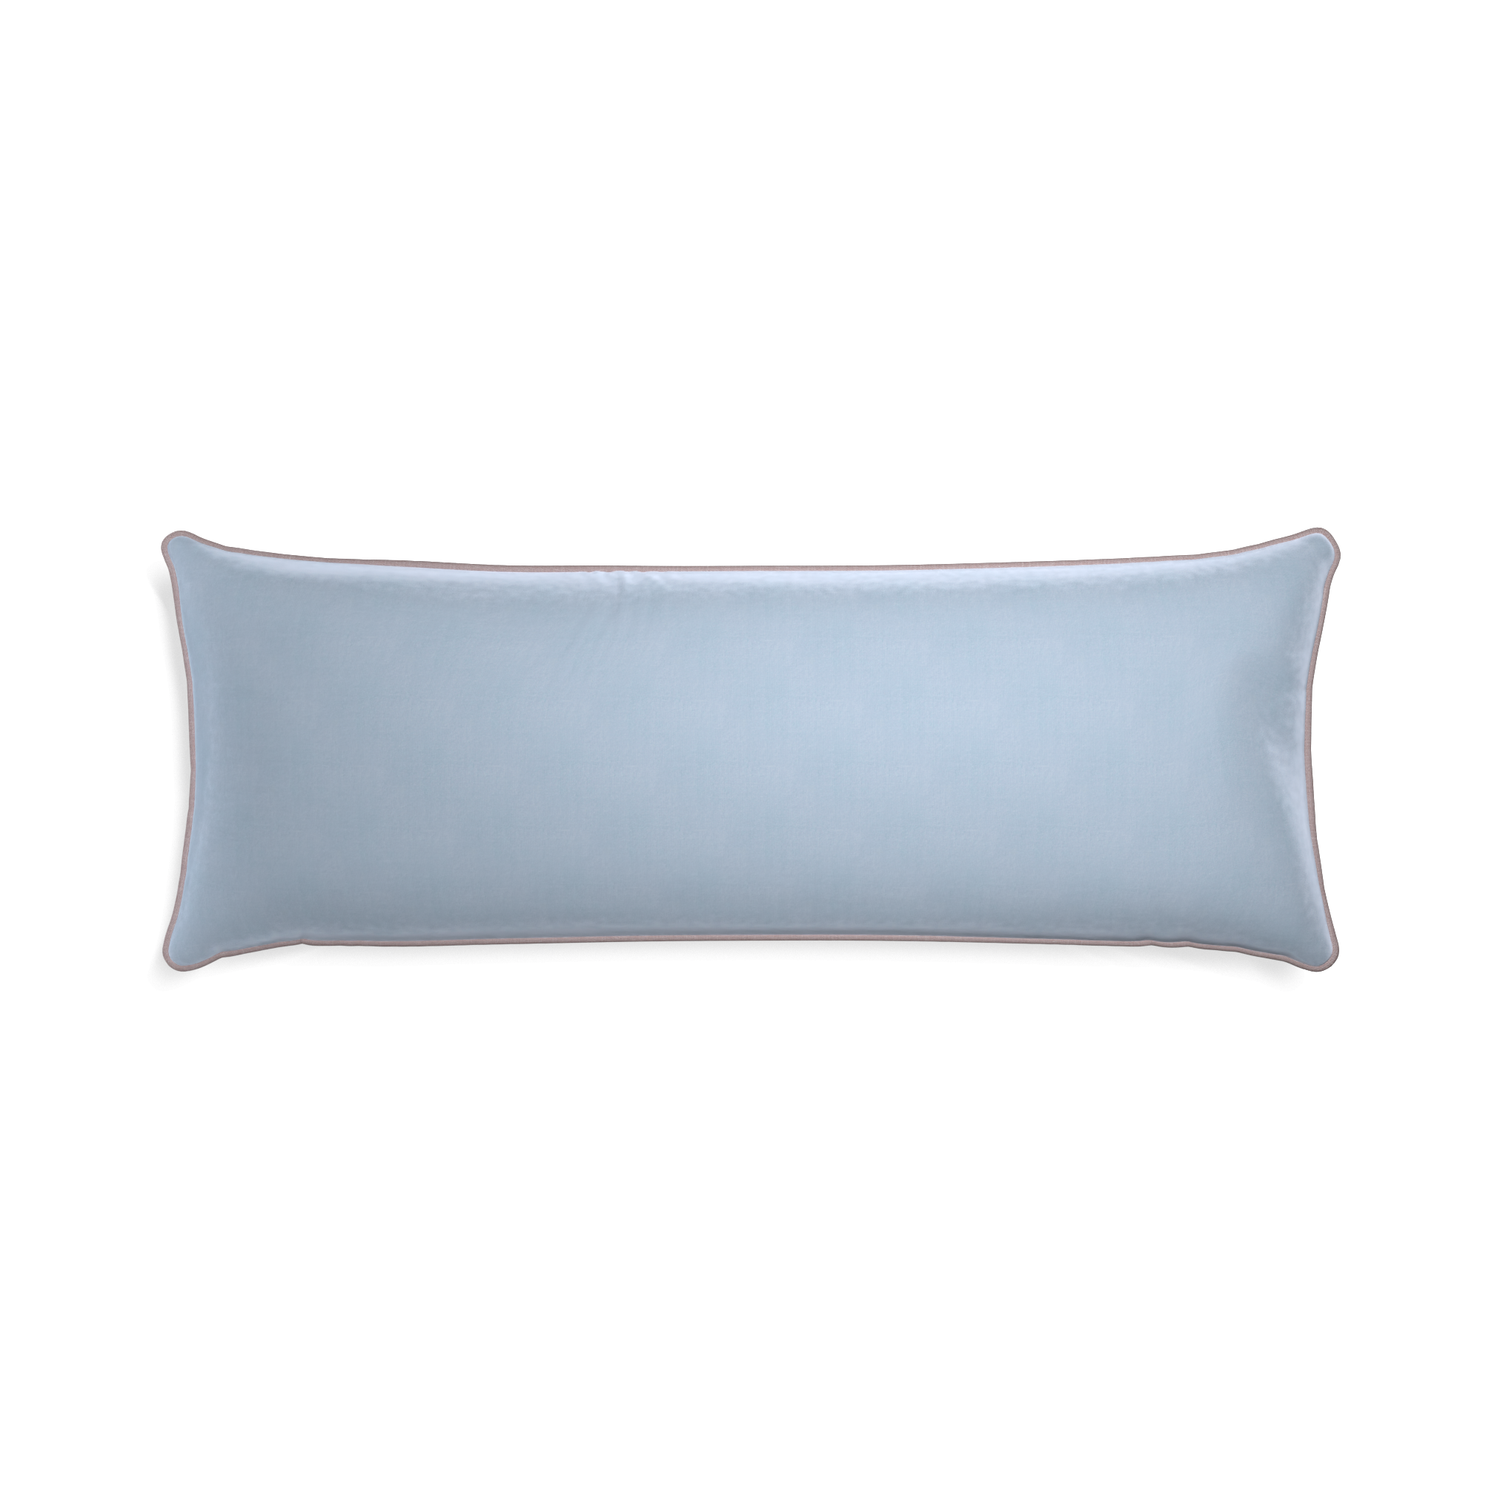 Xl-lumbar sky velvet custom skypillow with orchid piping on white background